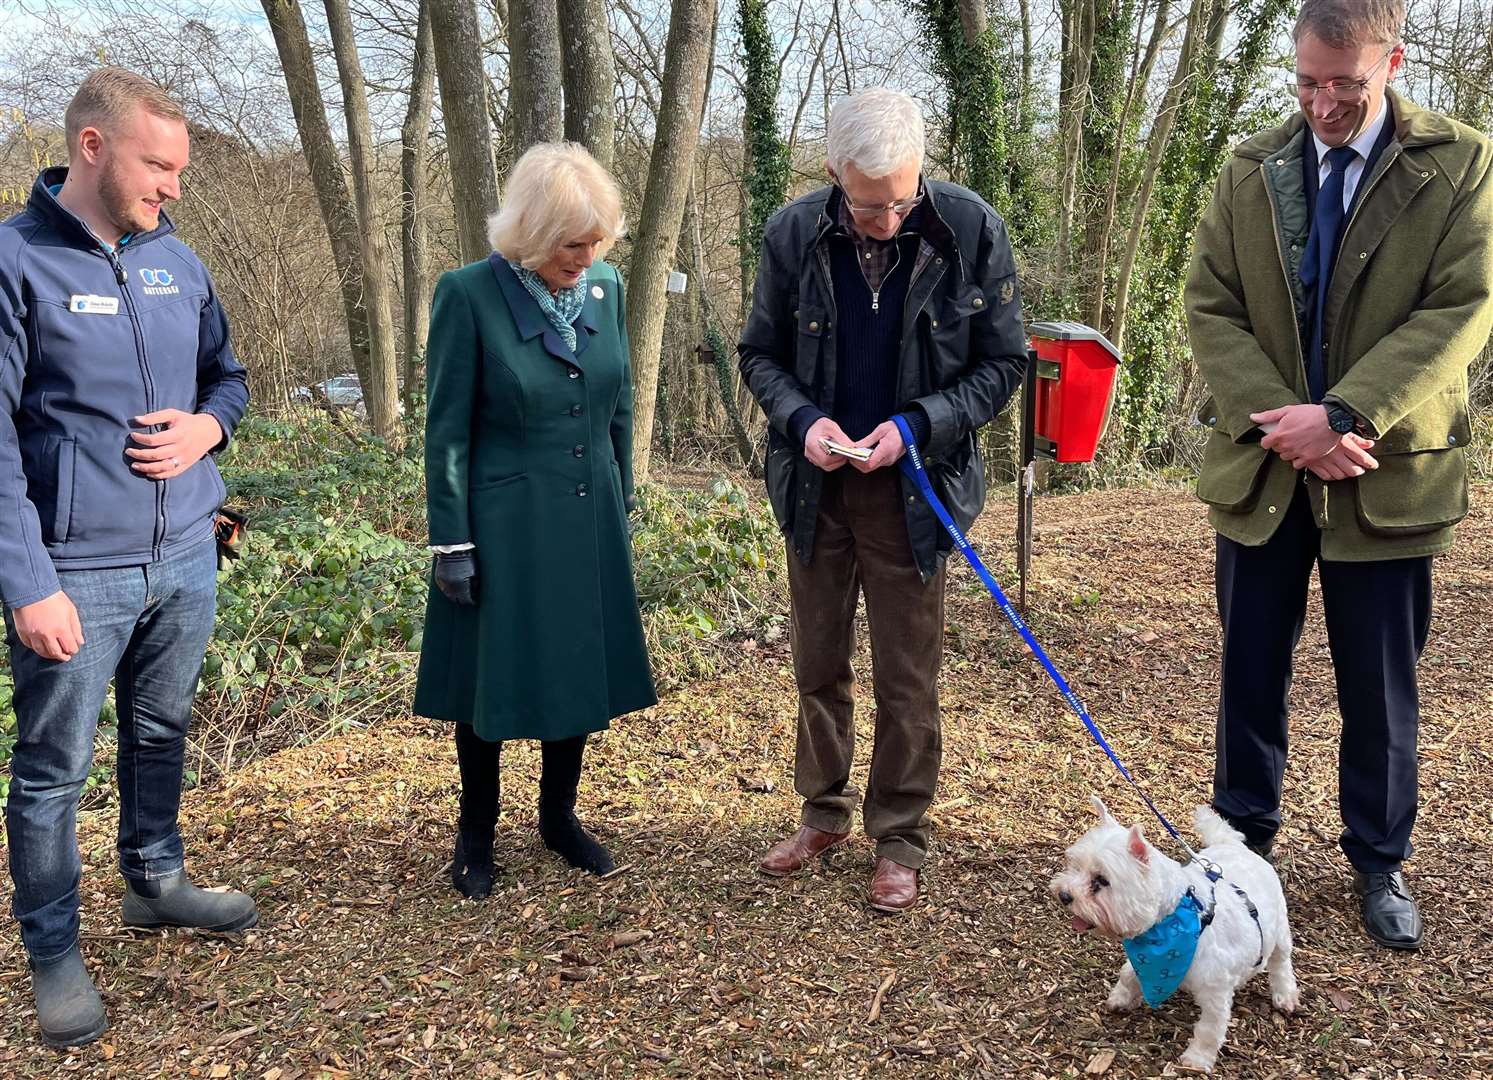 TV star Paul O'Grady shows the Duchess of Cornwall his pet dog at Battersea Dogs; Home, Brands Hatch